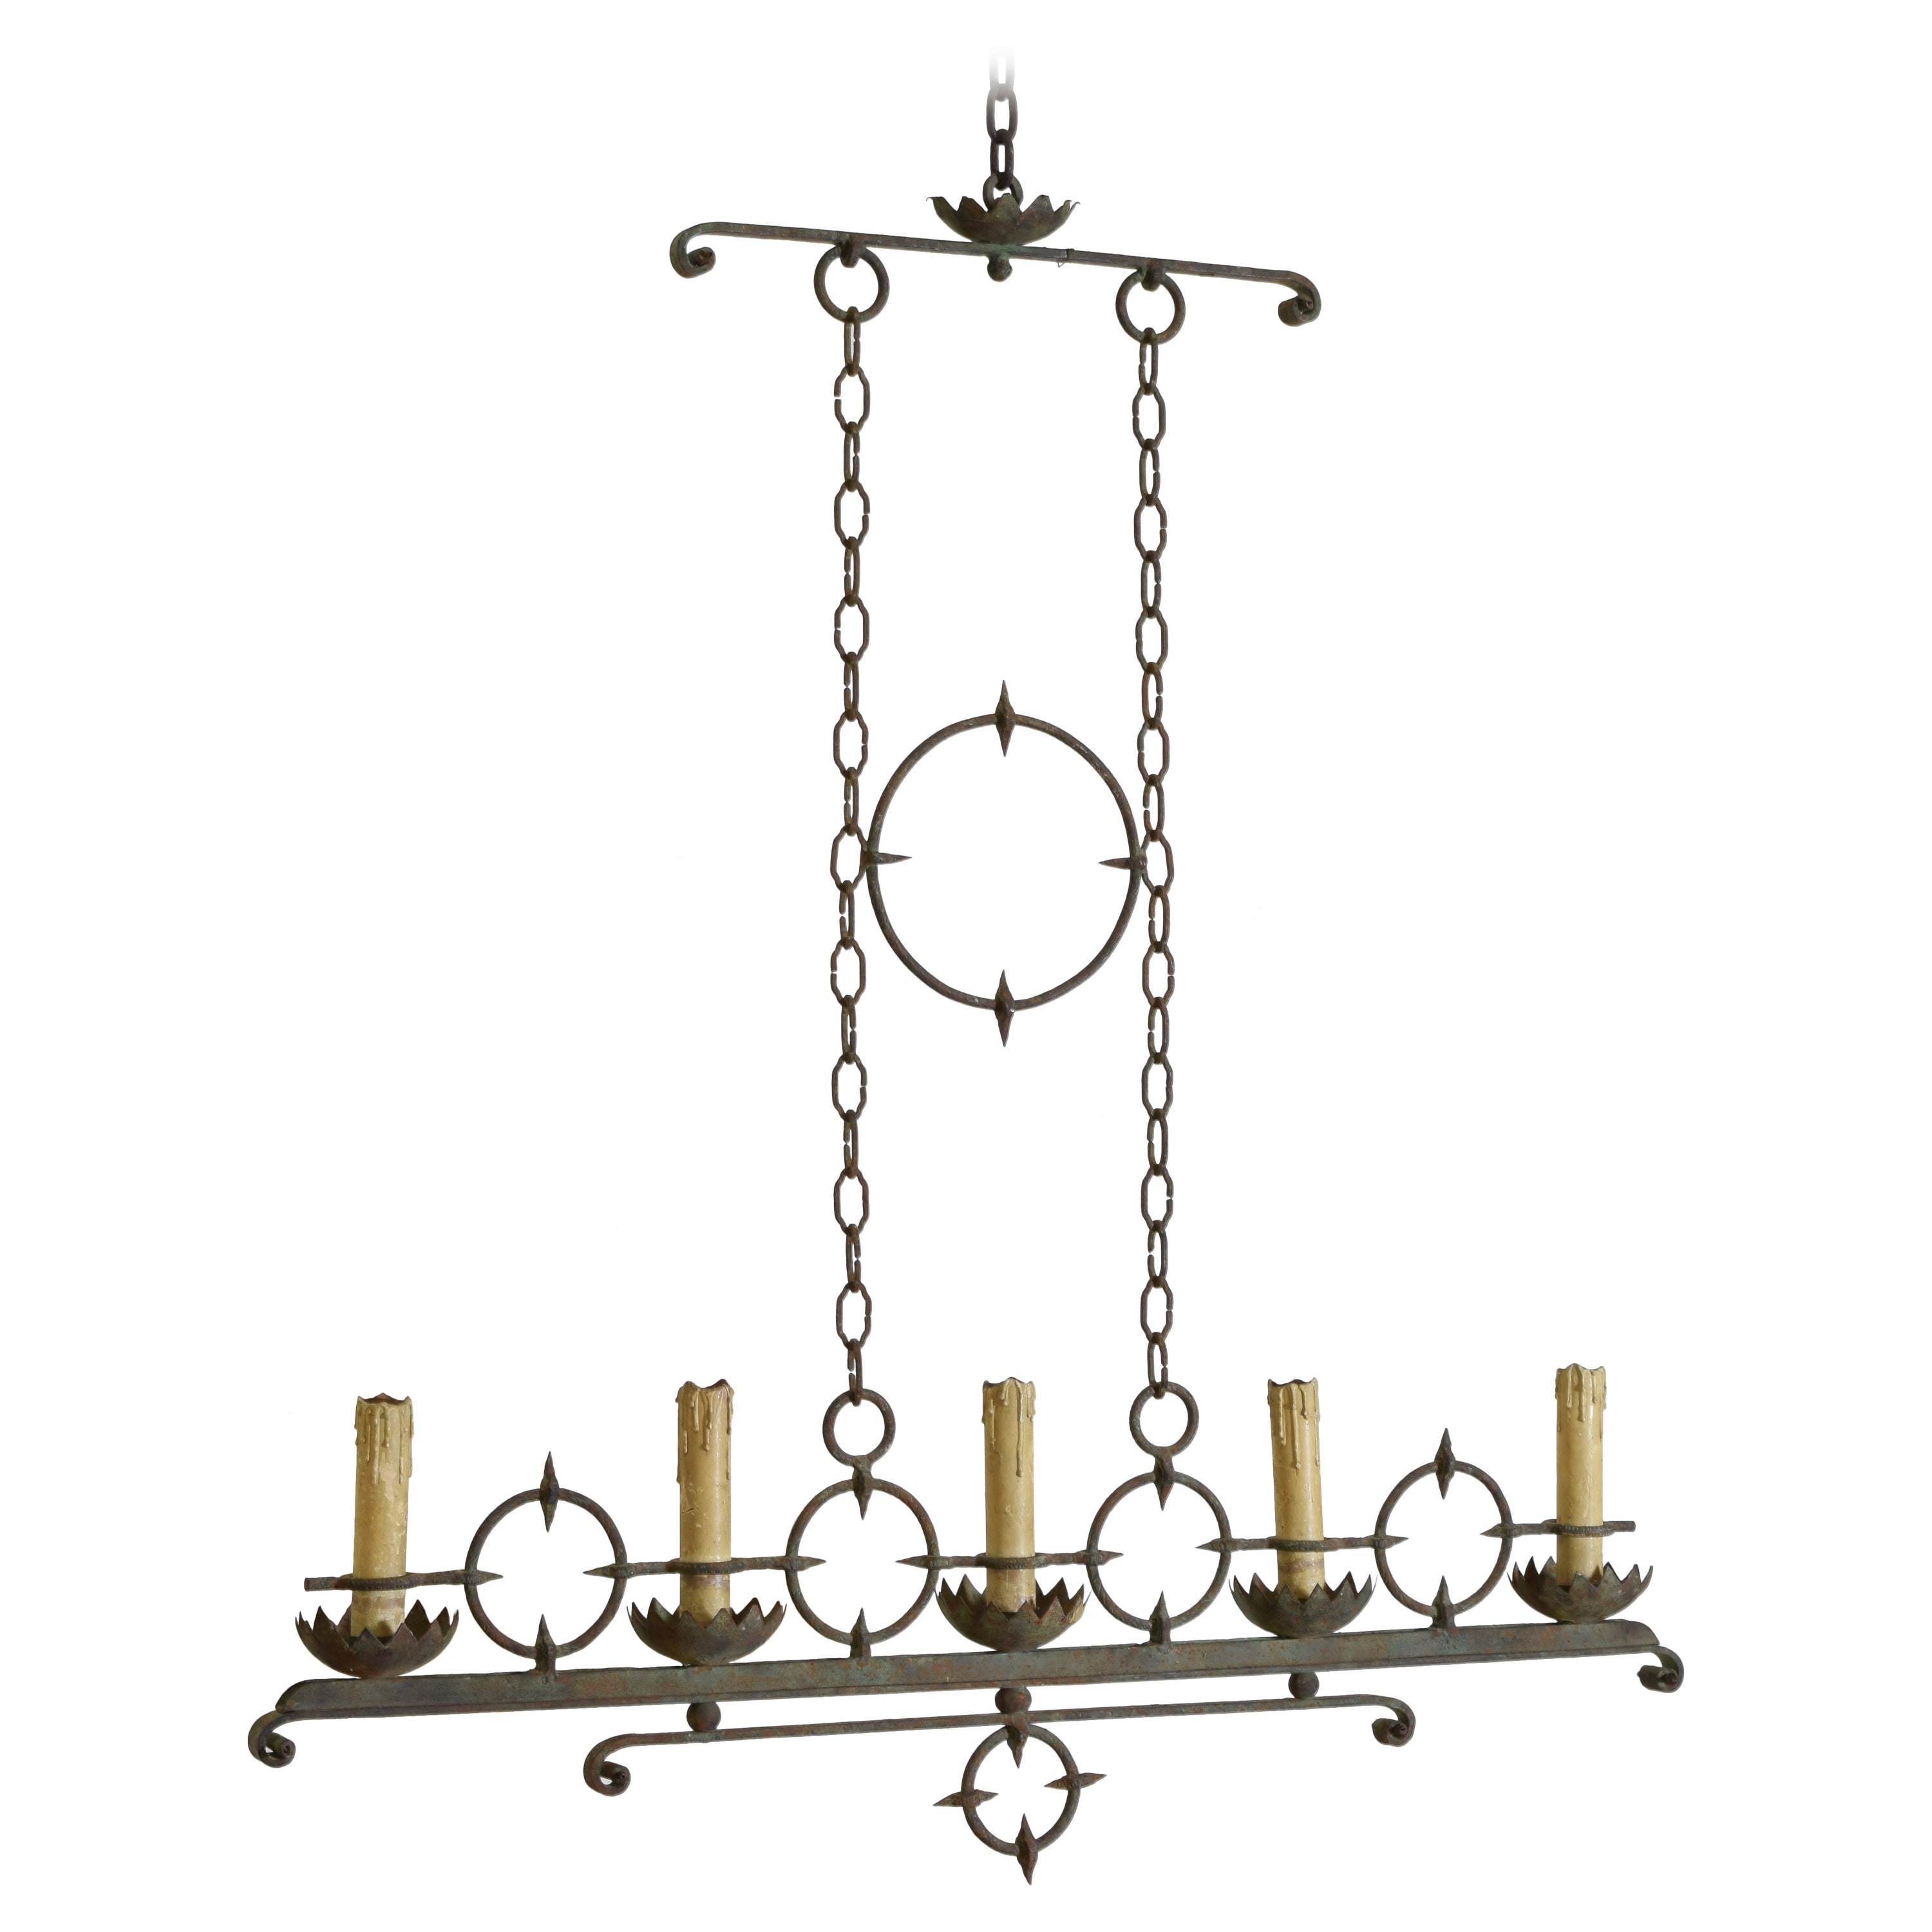 French Arts & Crafts Wrought Iron & Painted Iron 5-Light Chandelier, Early 20thc